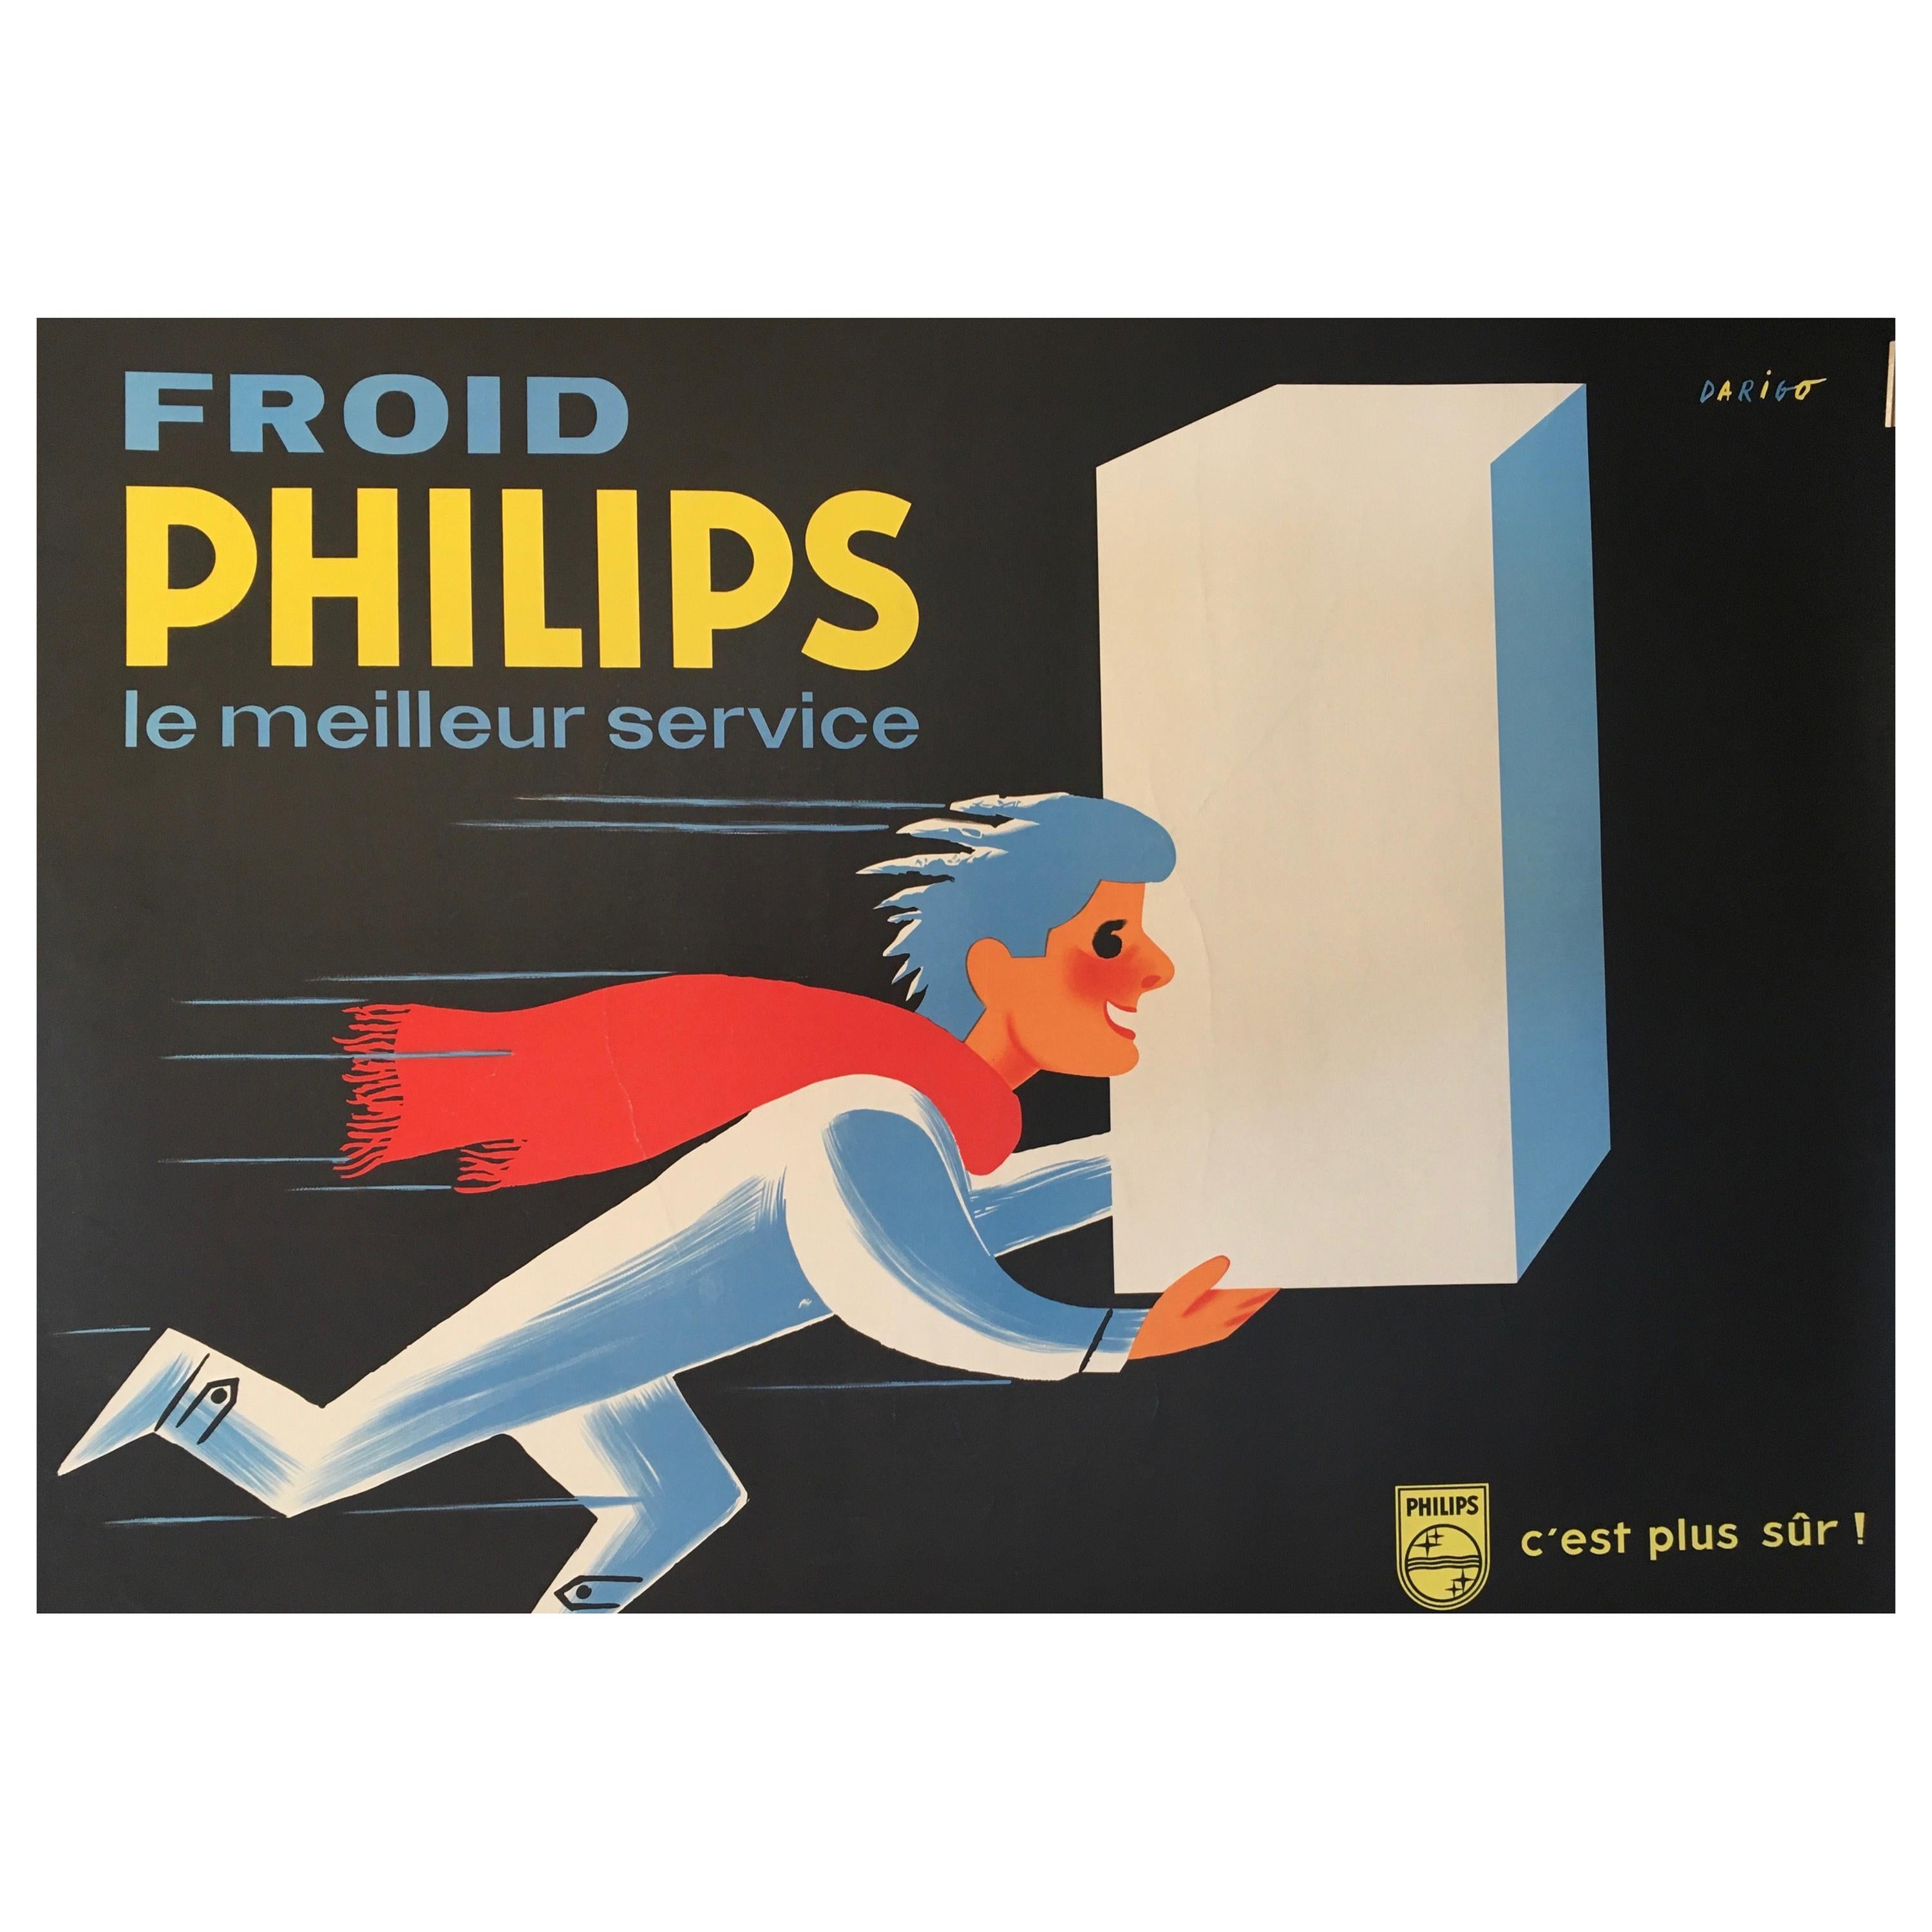 Midcentury Original Vintage French Poster, 'Froid Philips' by Darigo For Sale